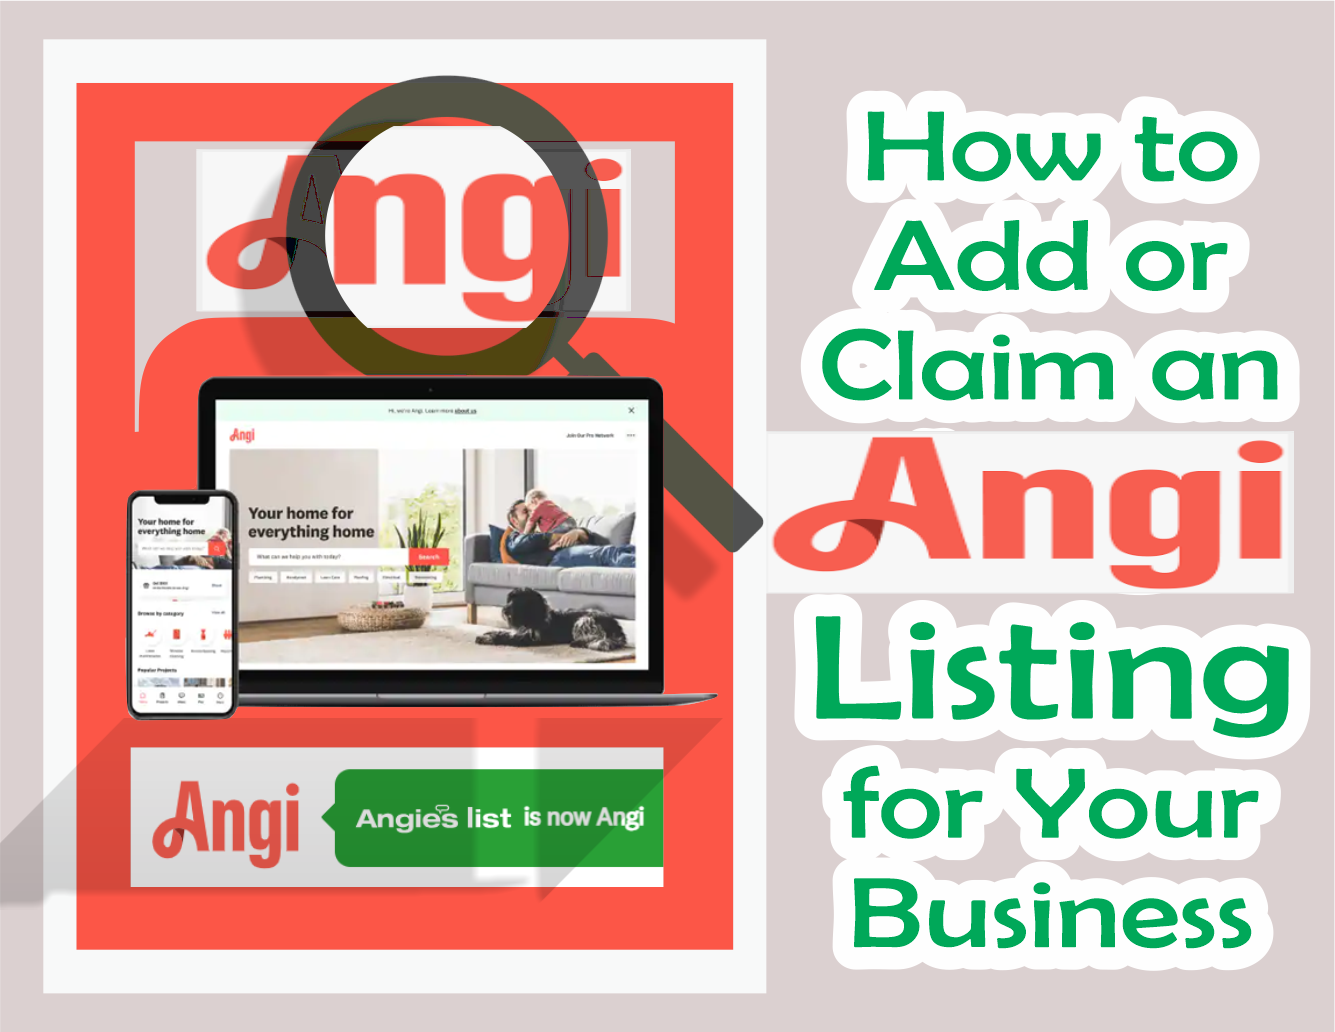 How to Claim or Add an Angi Listing